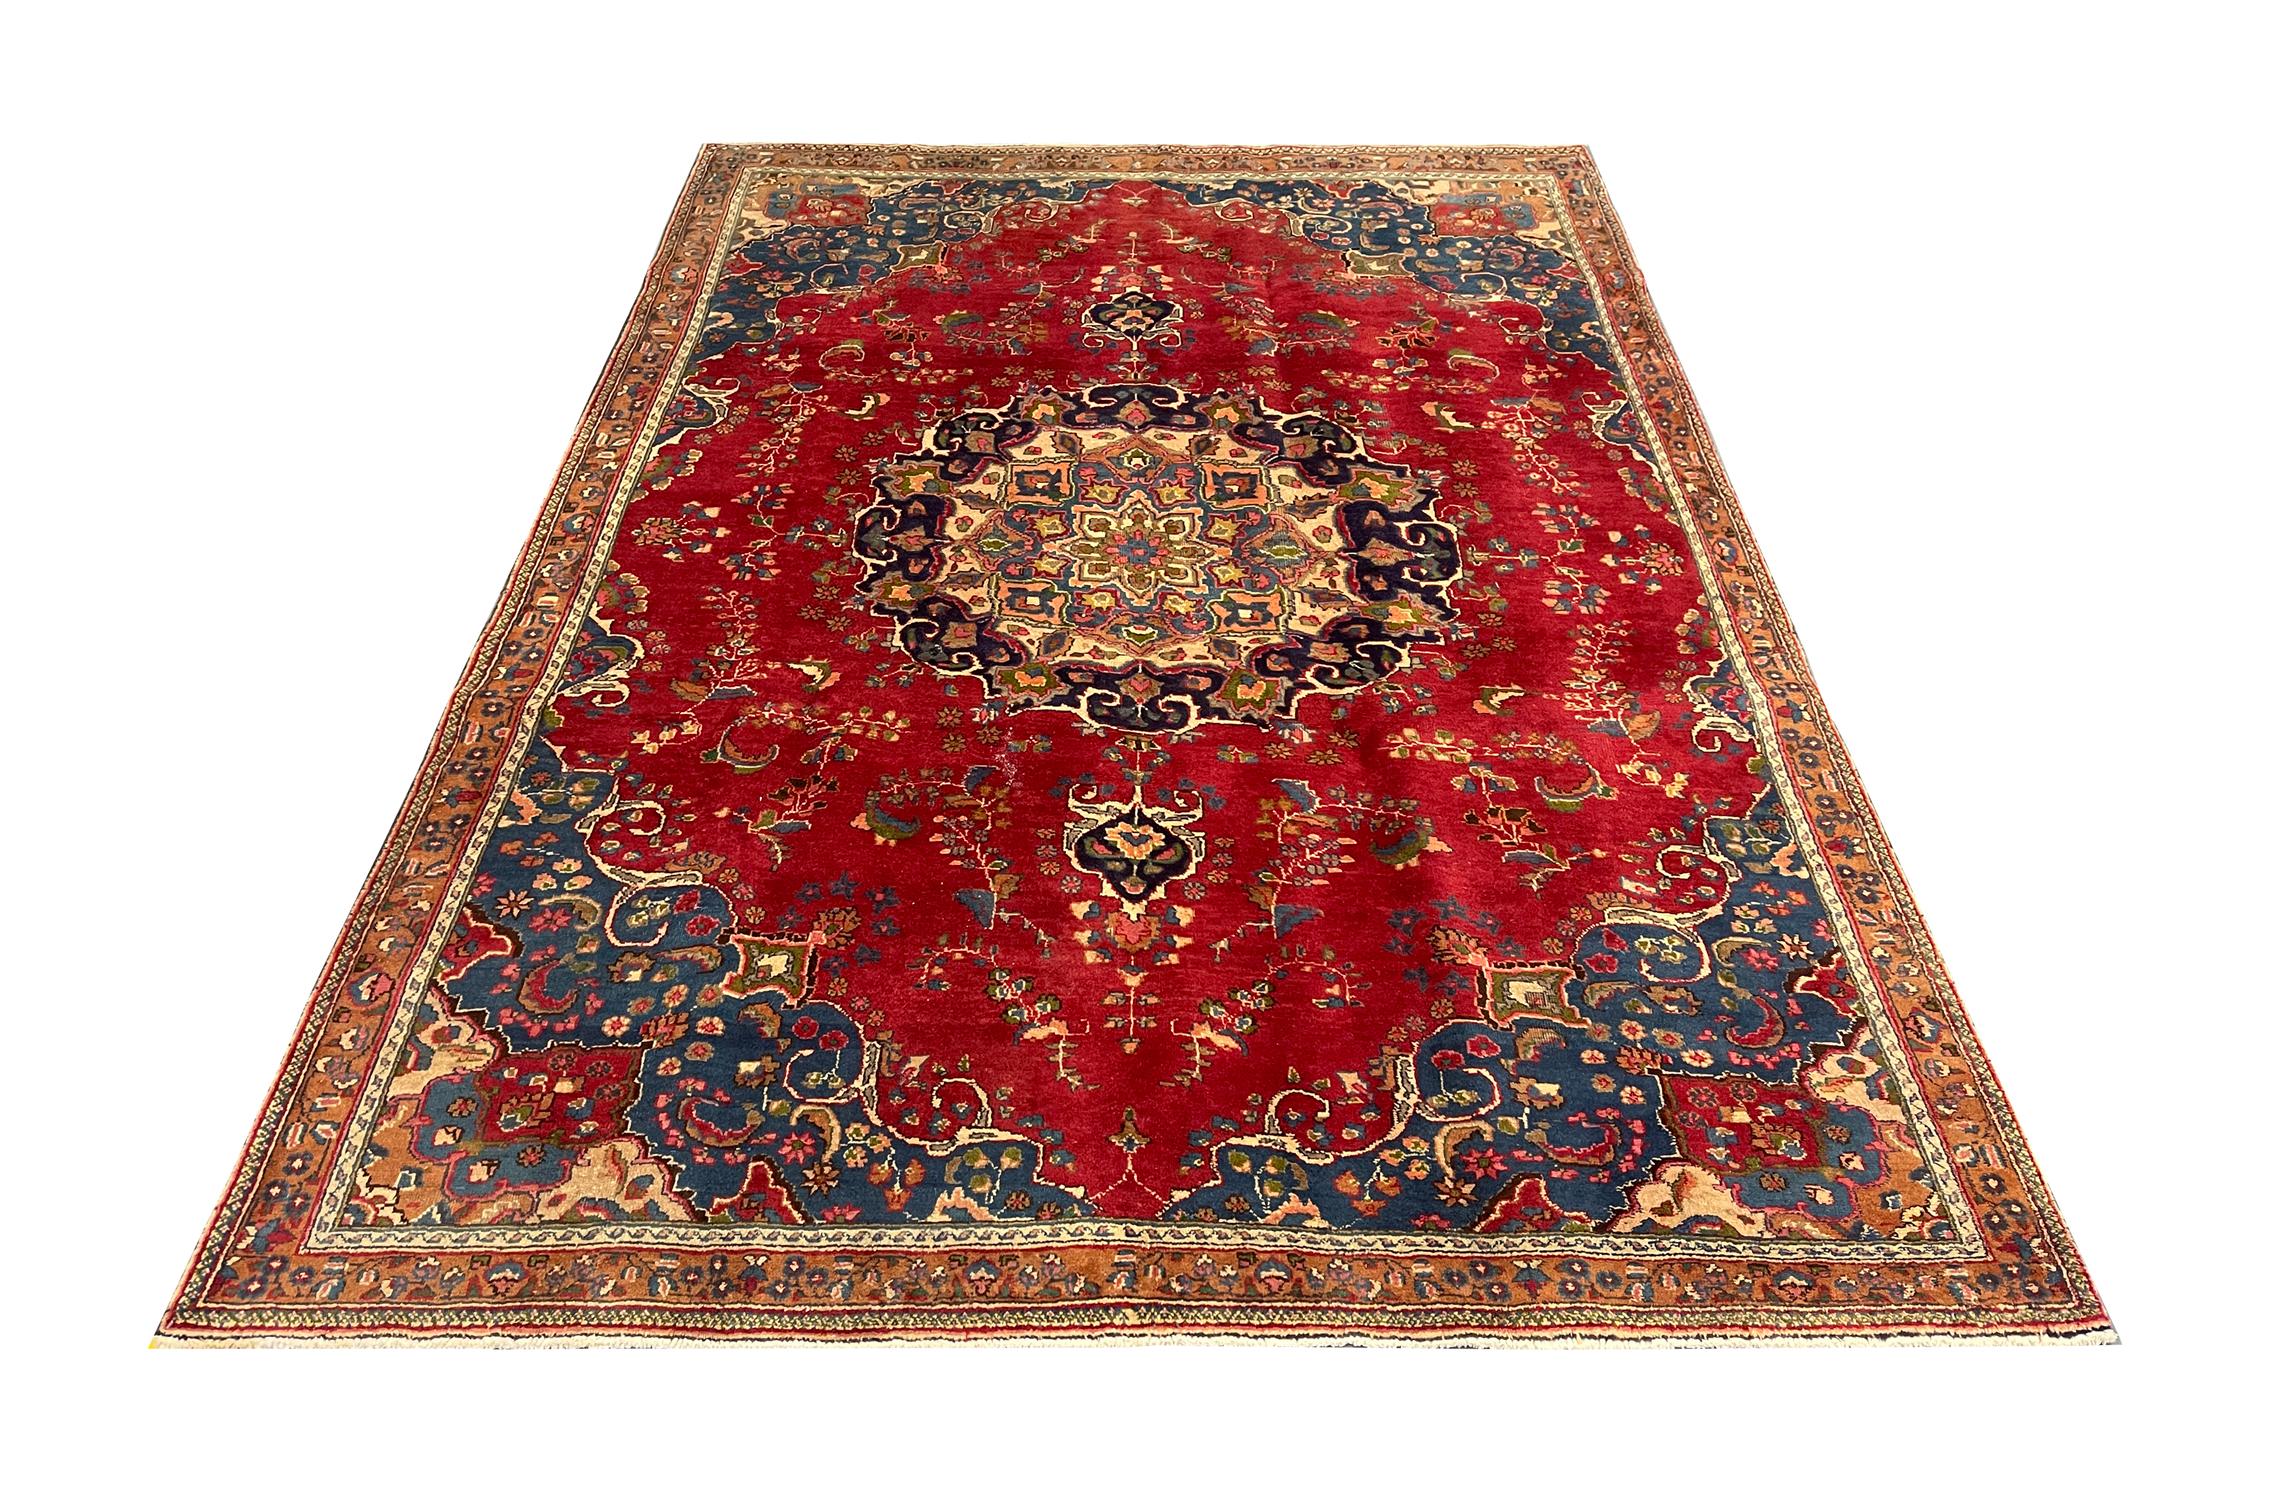 This unique wool area rug is a fantastic example of Turkish carpets woven in the late 20th century, circa 1970. The design features a large medallion and highly-decorative surrounding design. The rich red and blue colours used have been chosen to